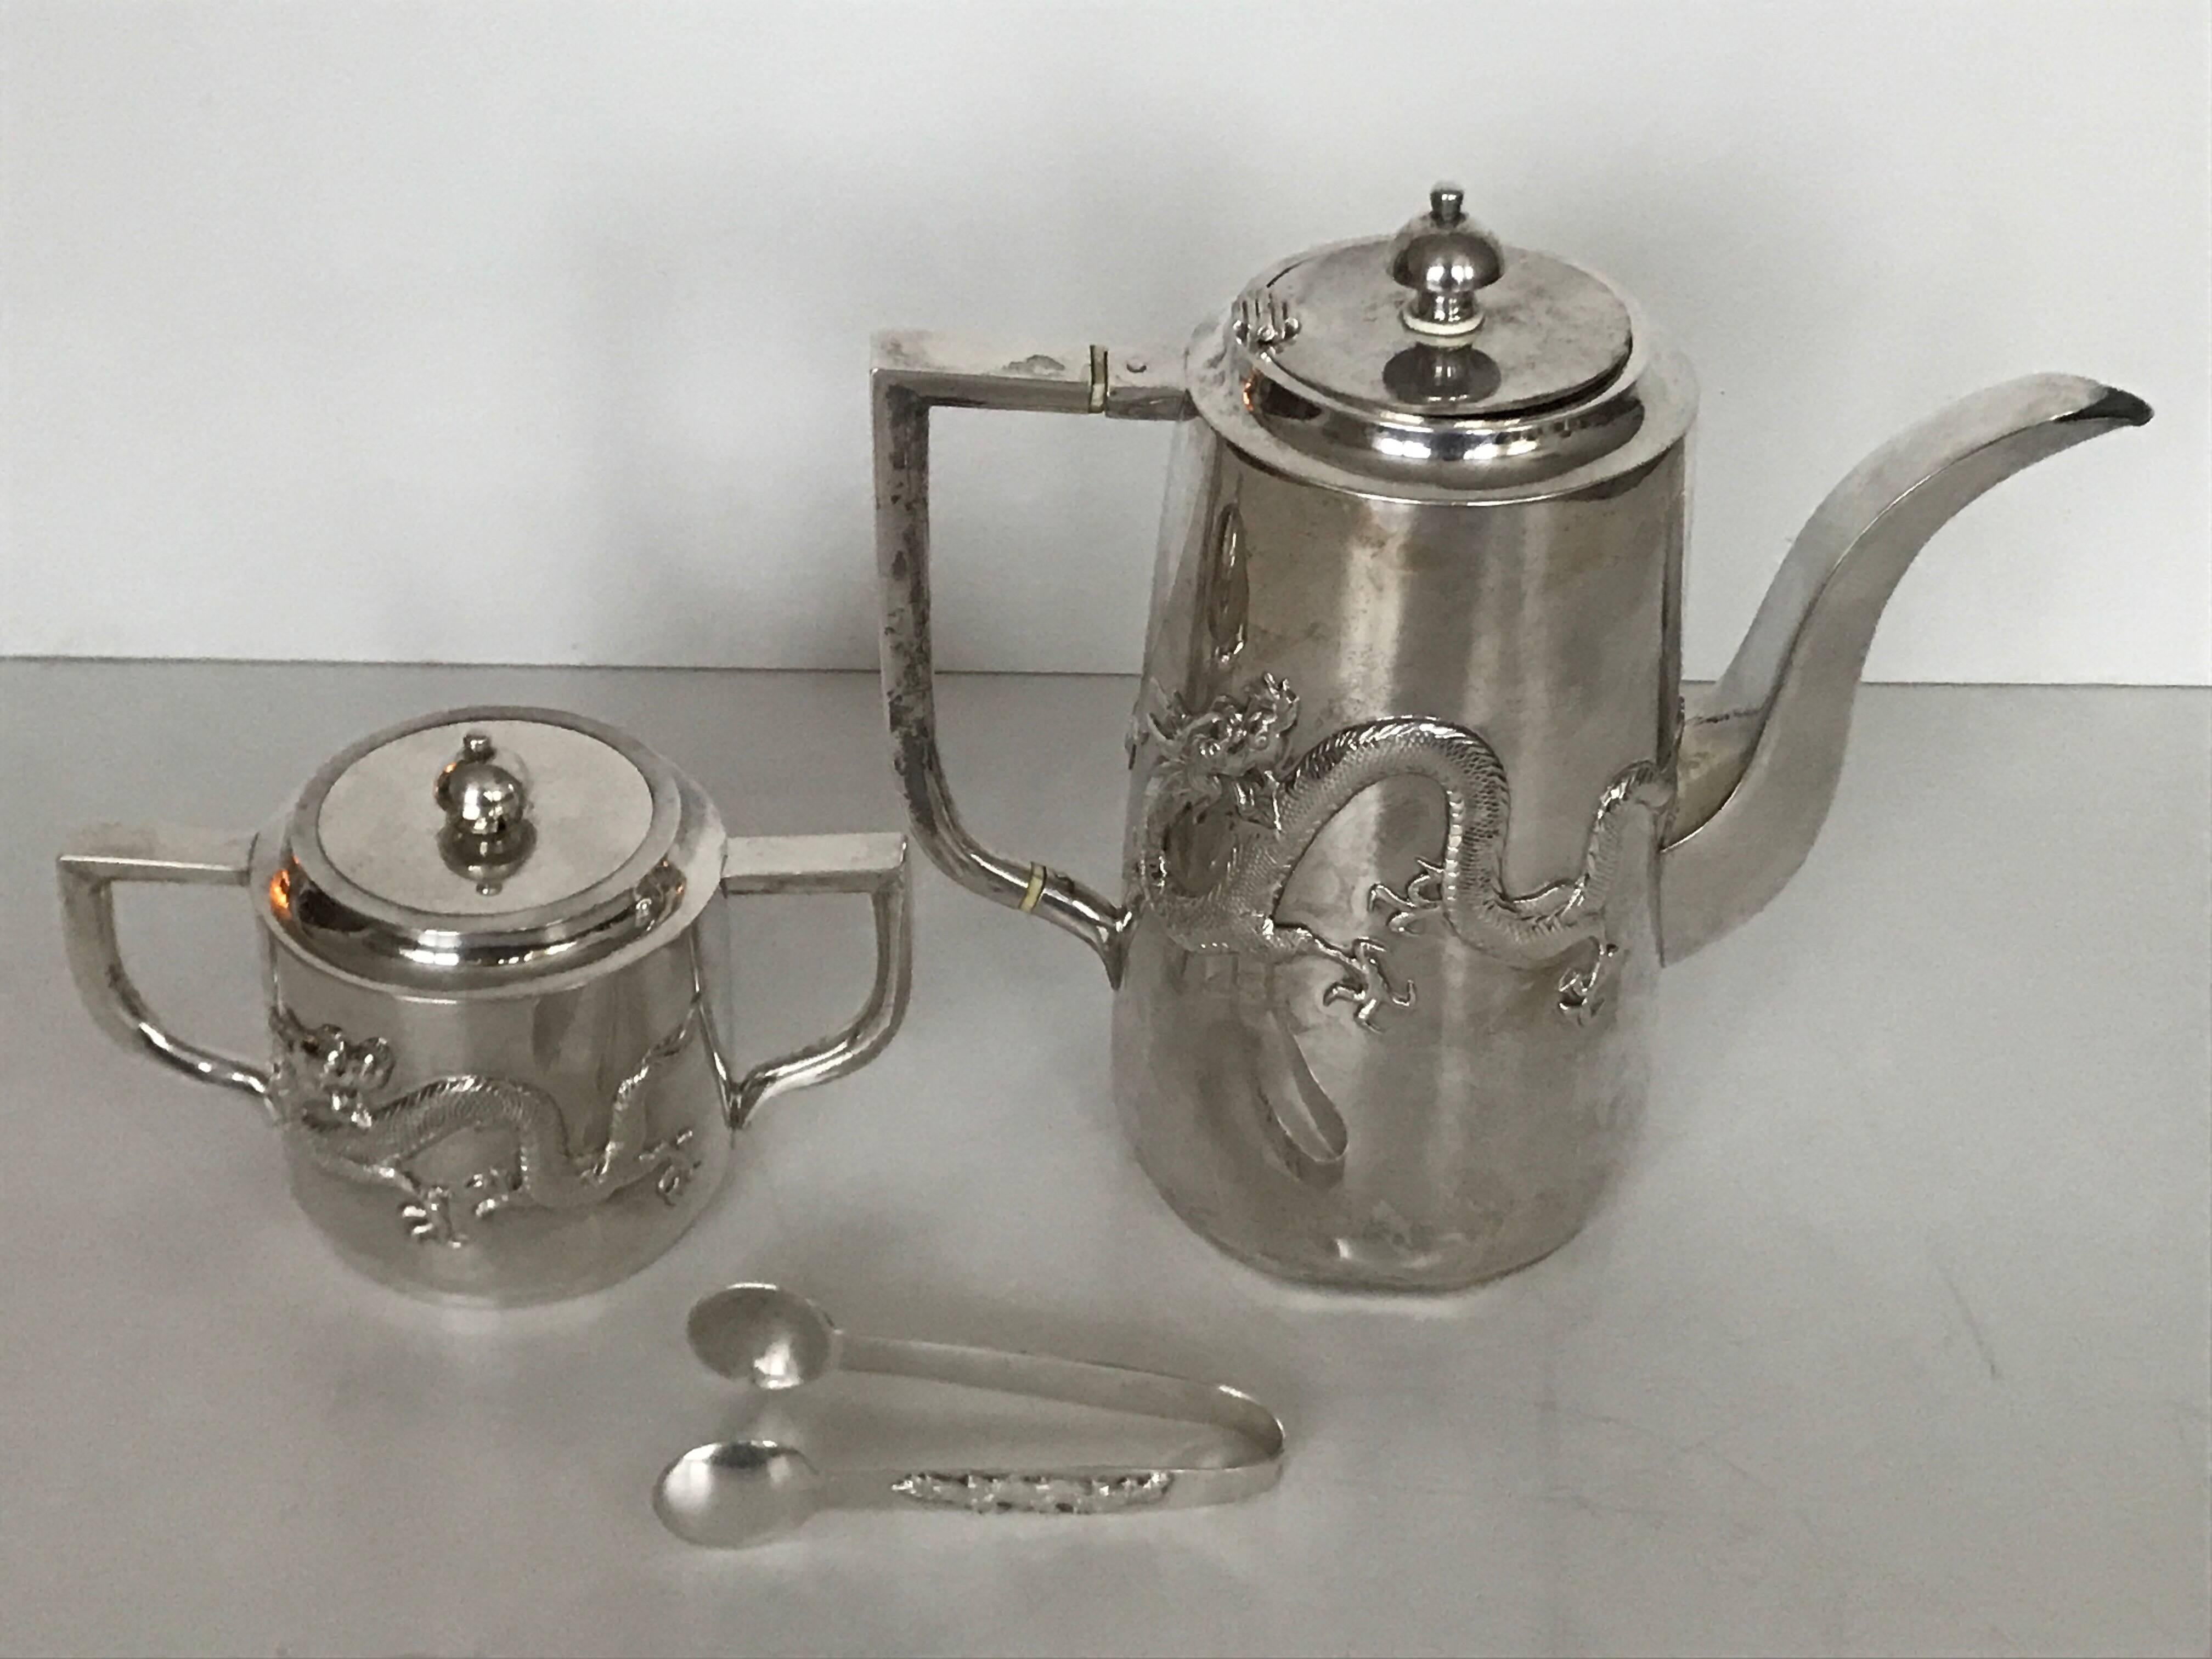 A very beautiful set of a teapot and a sugar bowl in Chinese export silver 0.900 made by the great silver smith Luen Hing in the early 1900´s most likely around 1920. The height of the tea pot is 21 cm, the length from sprout to handle is 22.5 cm